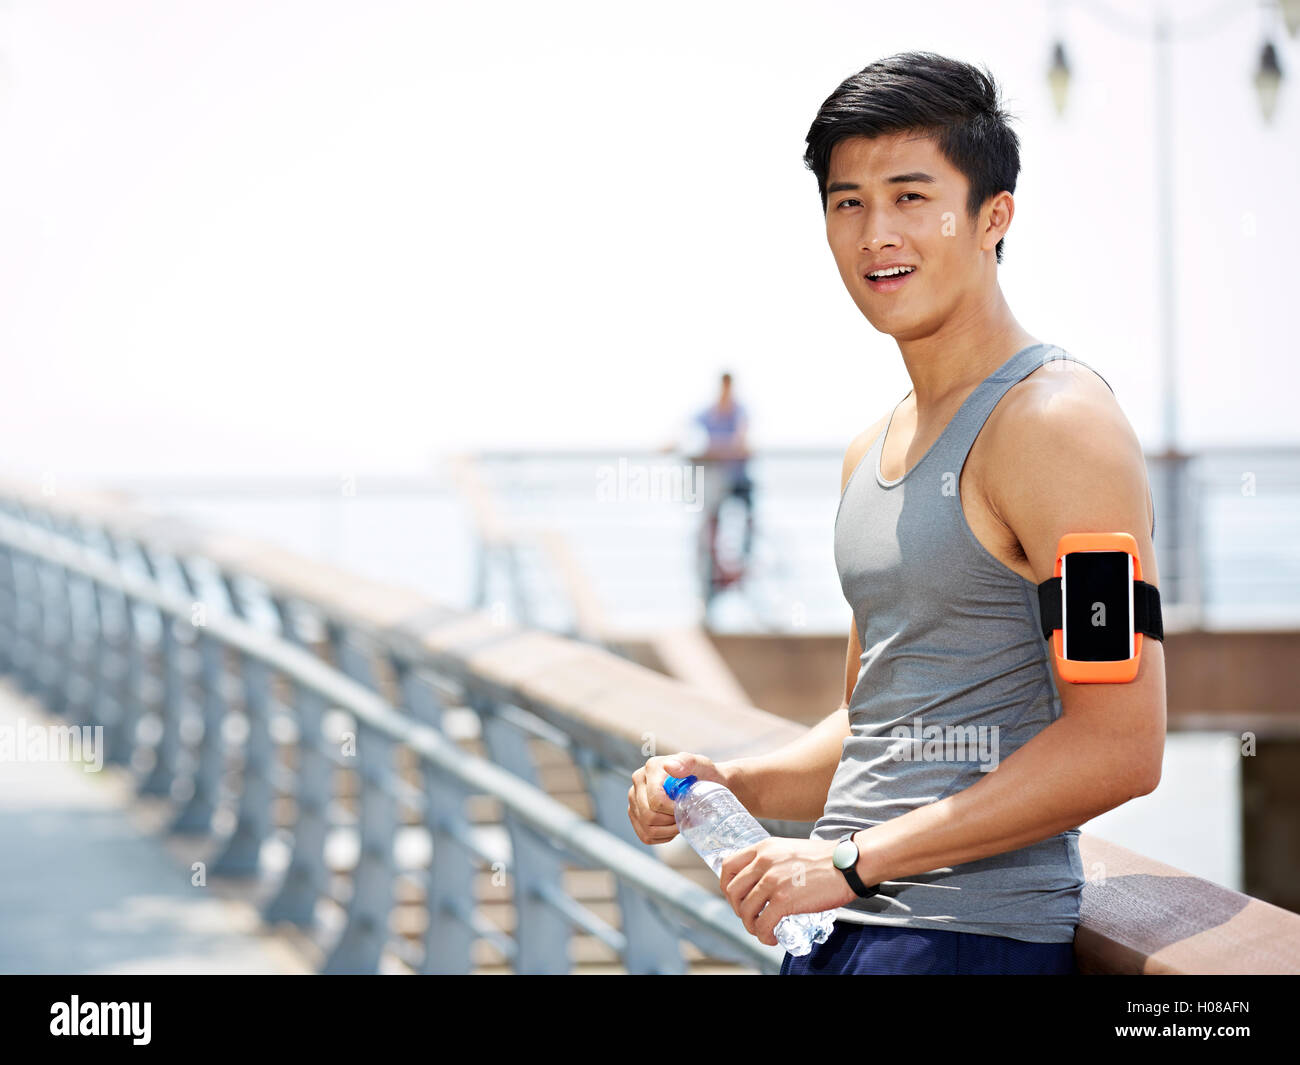 young asian man taking a break with a bottle of water in hands during outdoor exercise Stock Photo